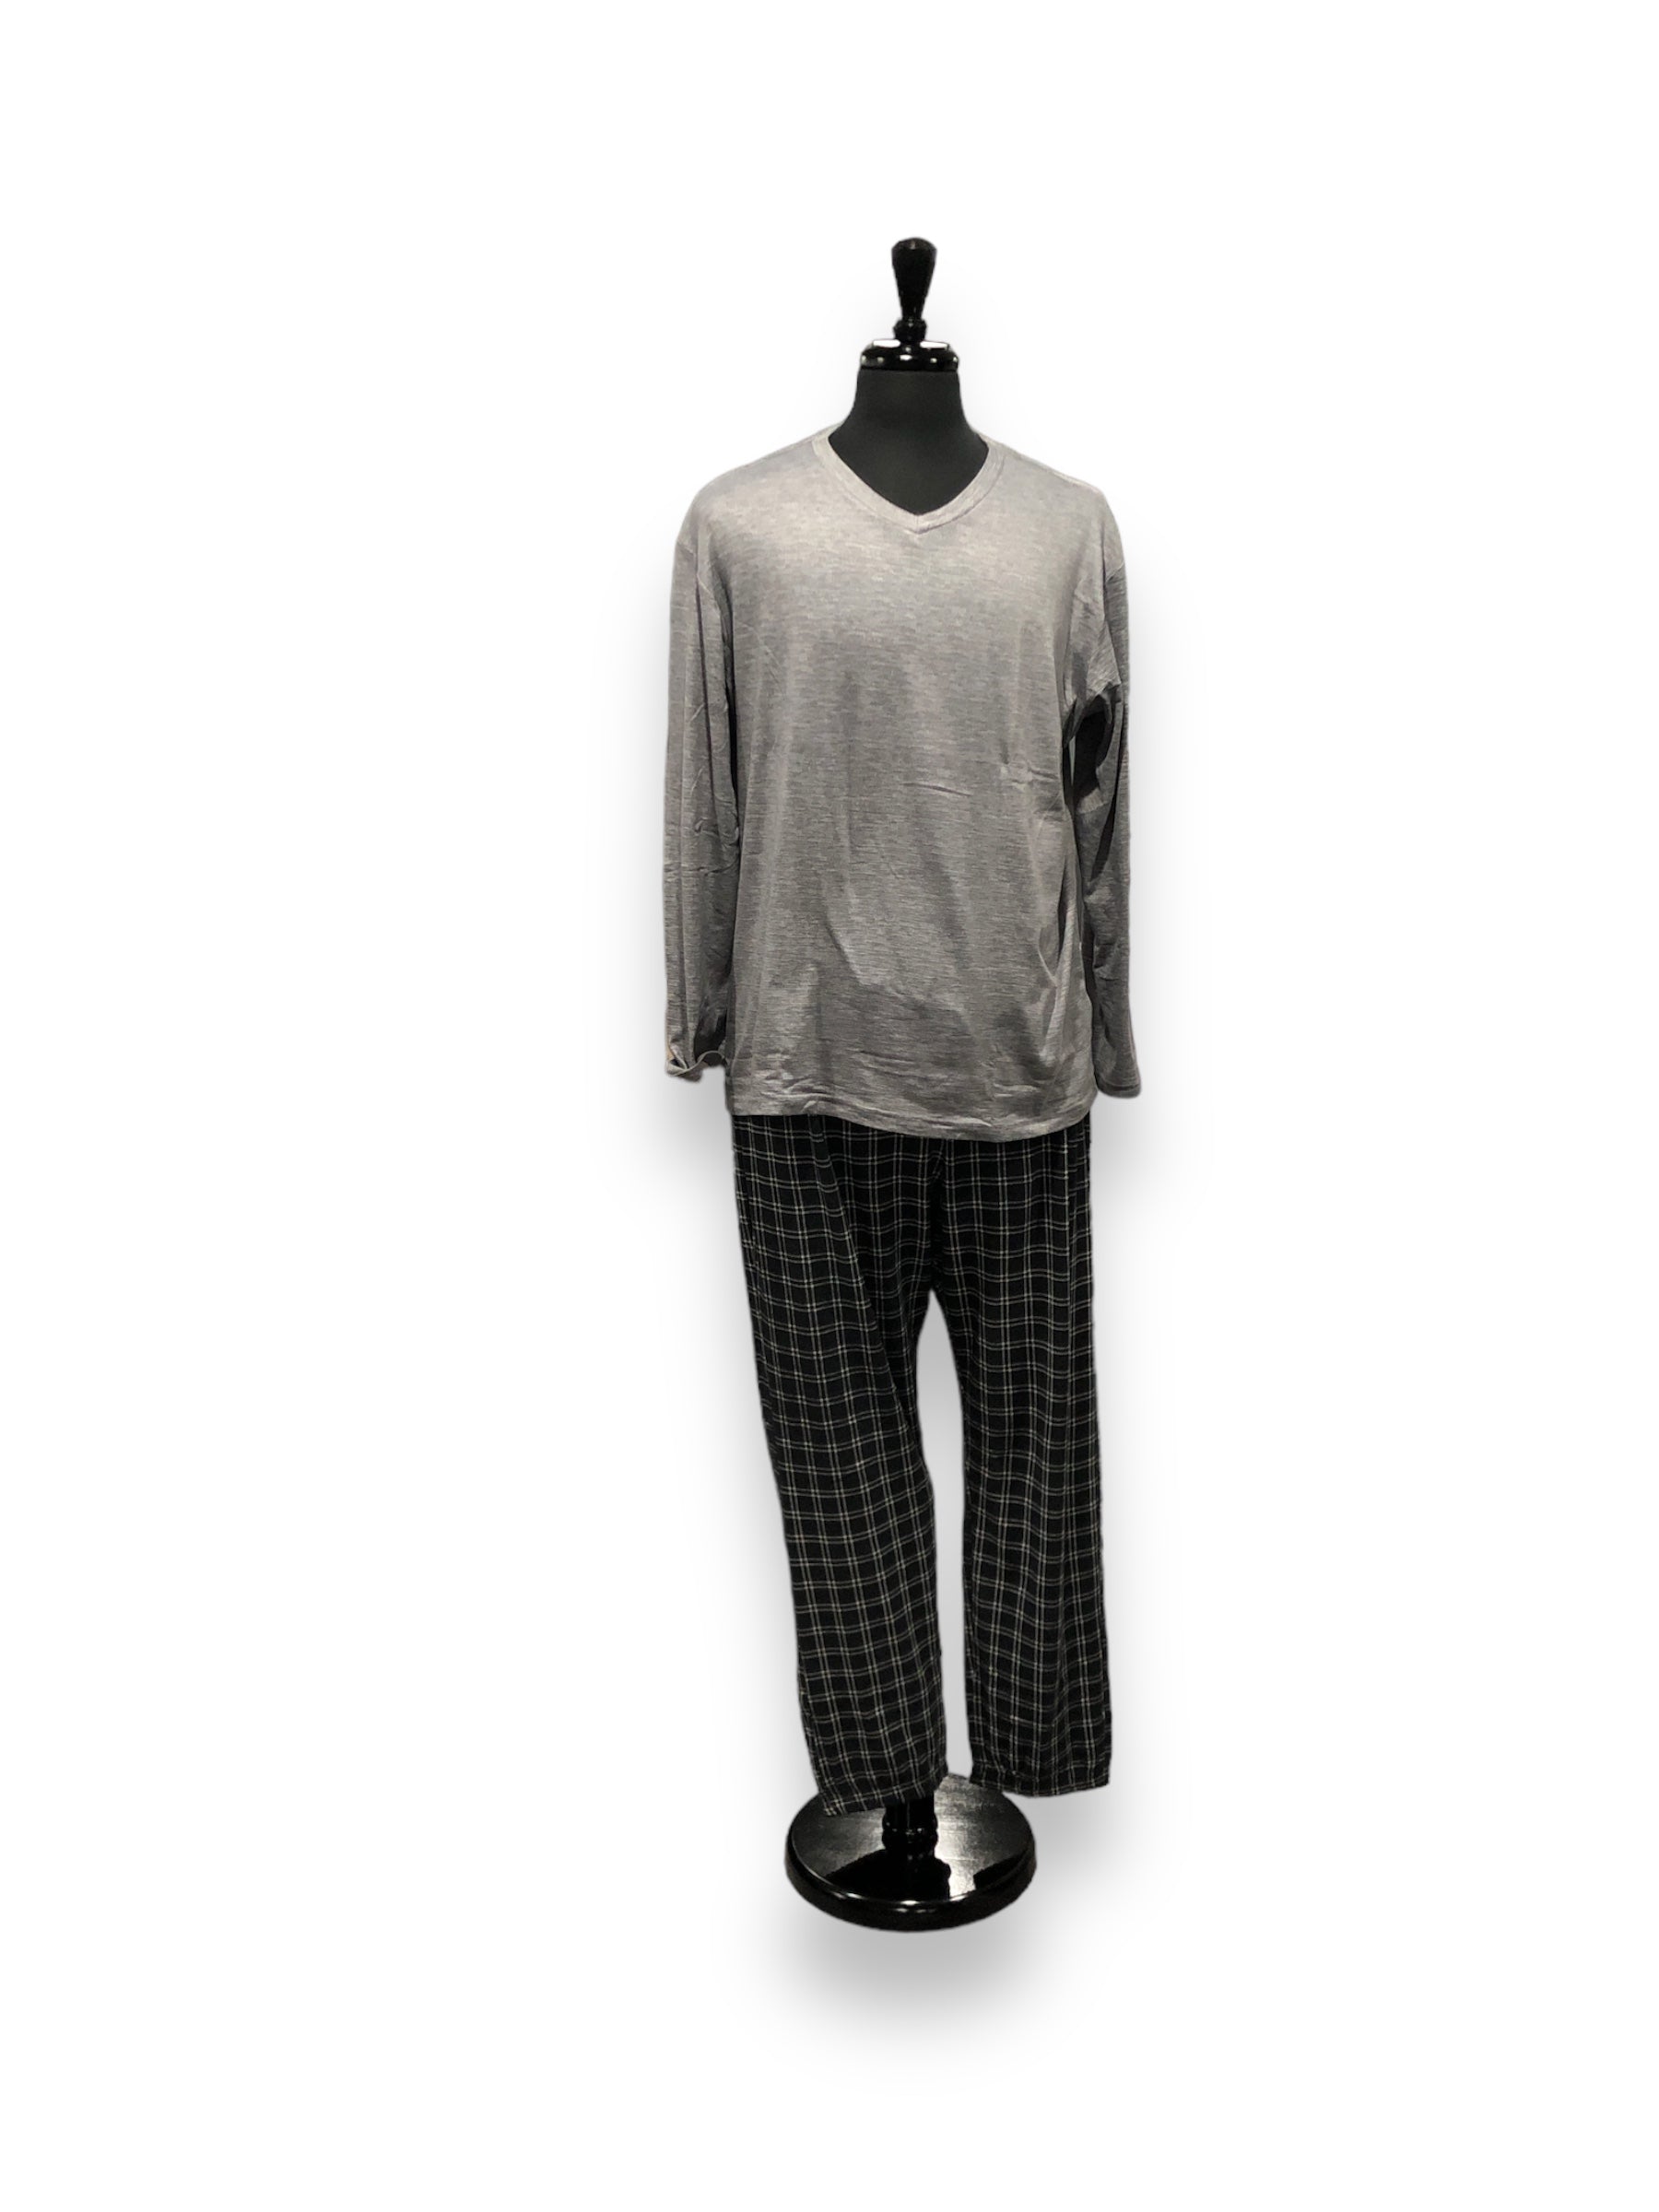 Men's Two Piece Peached Jersey knit Pajama Set with Long Sleeved T-Shirt